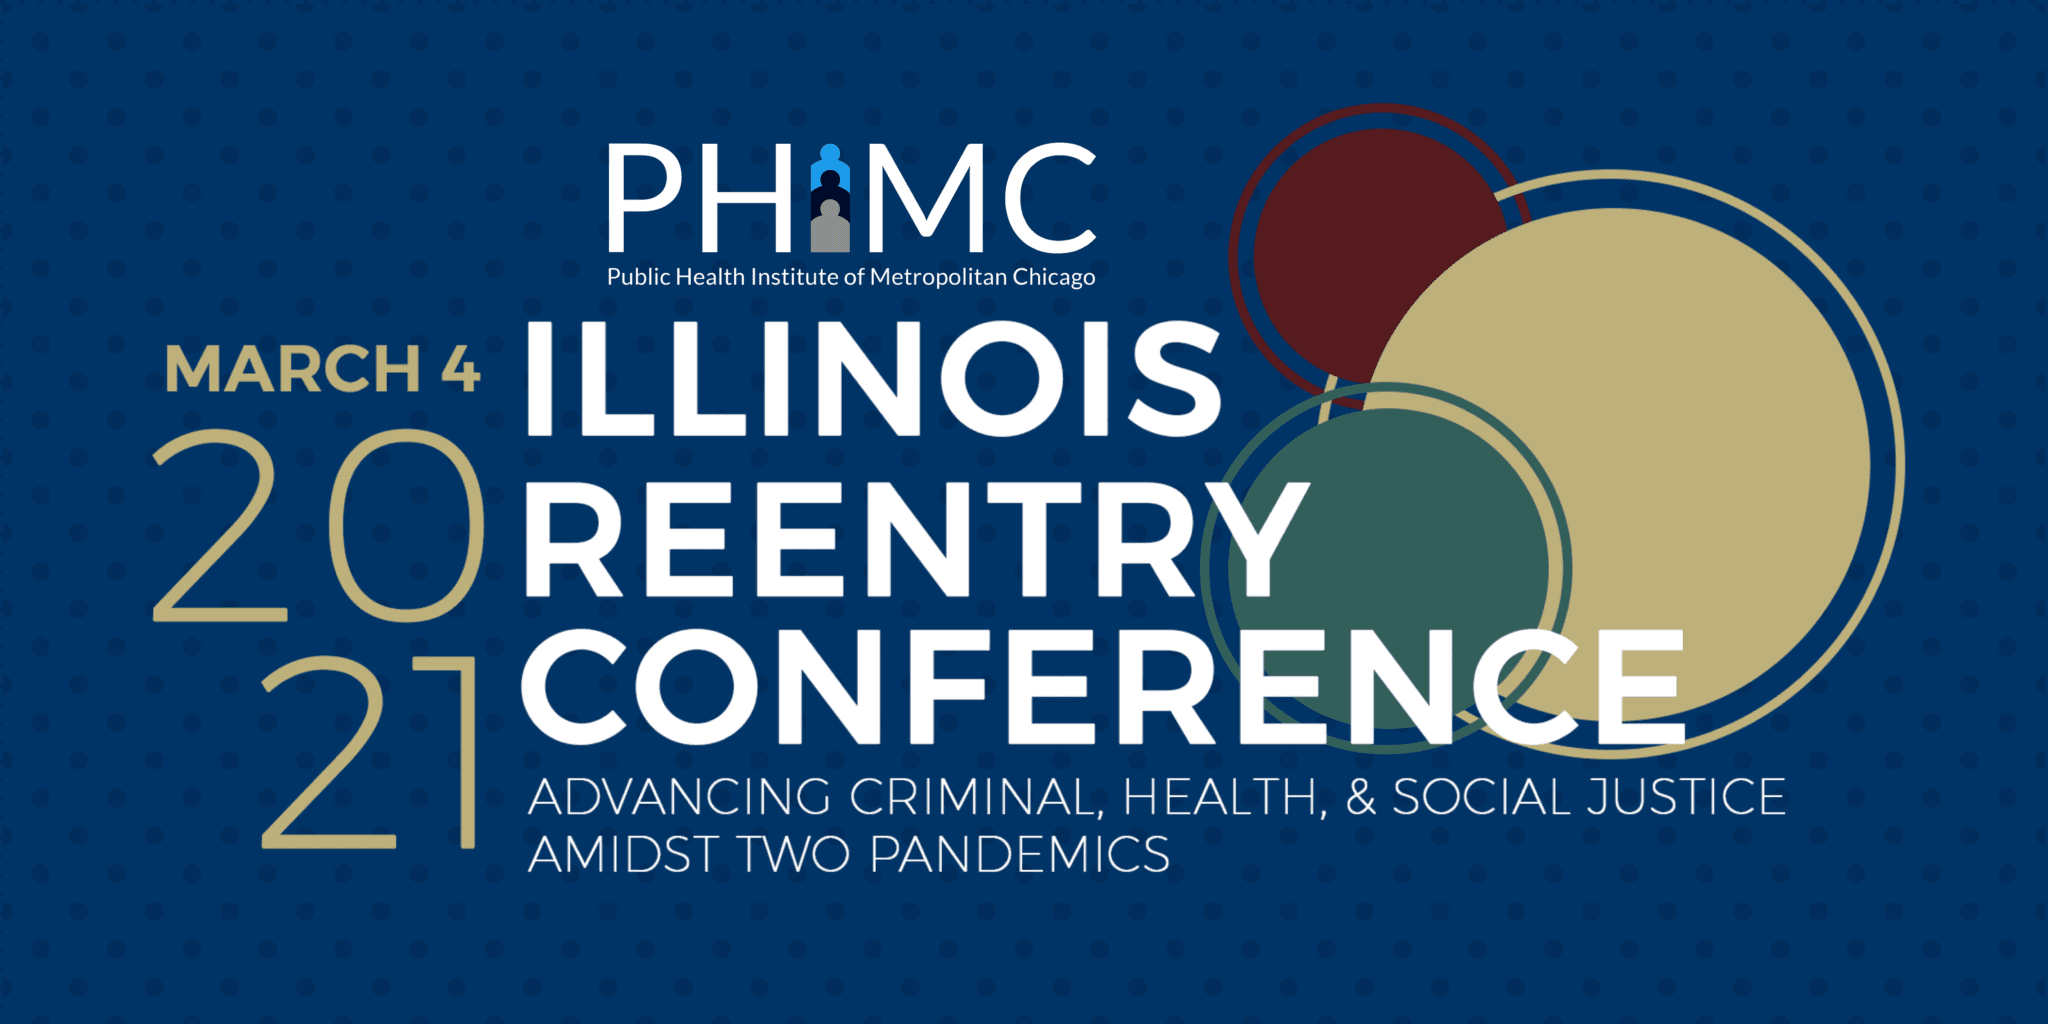 2021 Illinois Reentry Conference Public Health Institute of